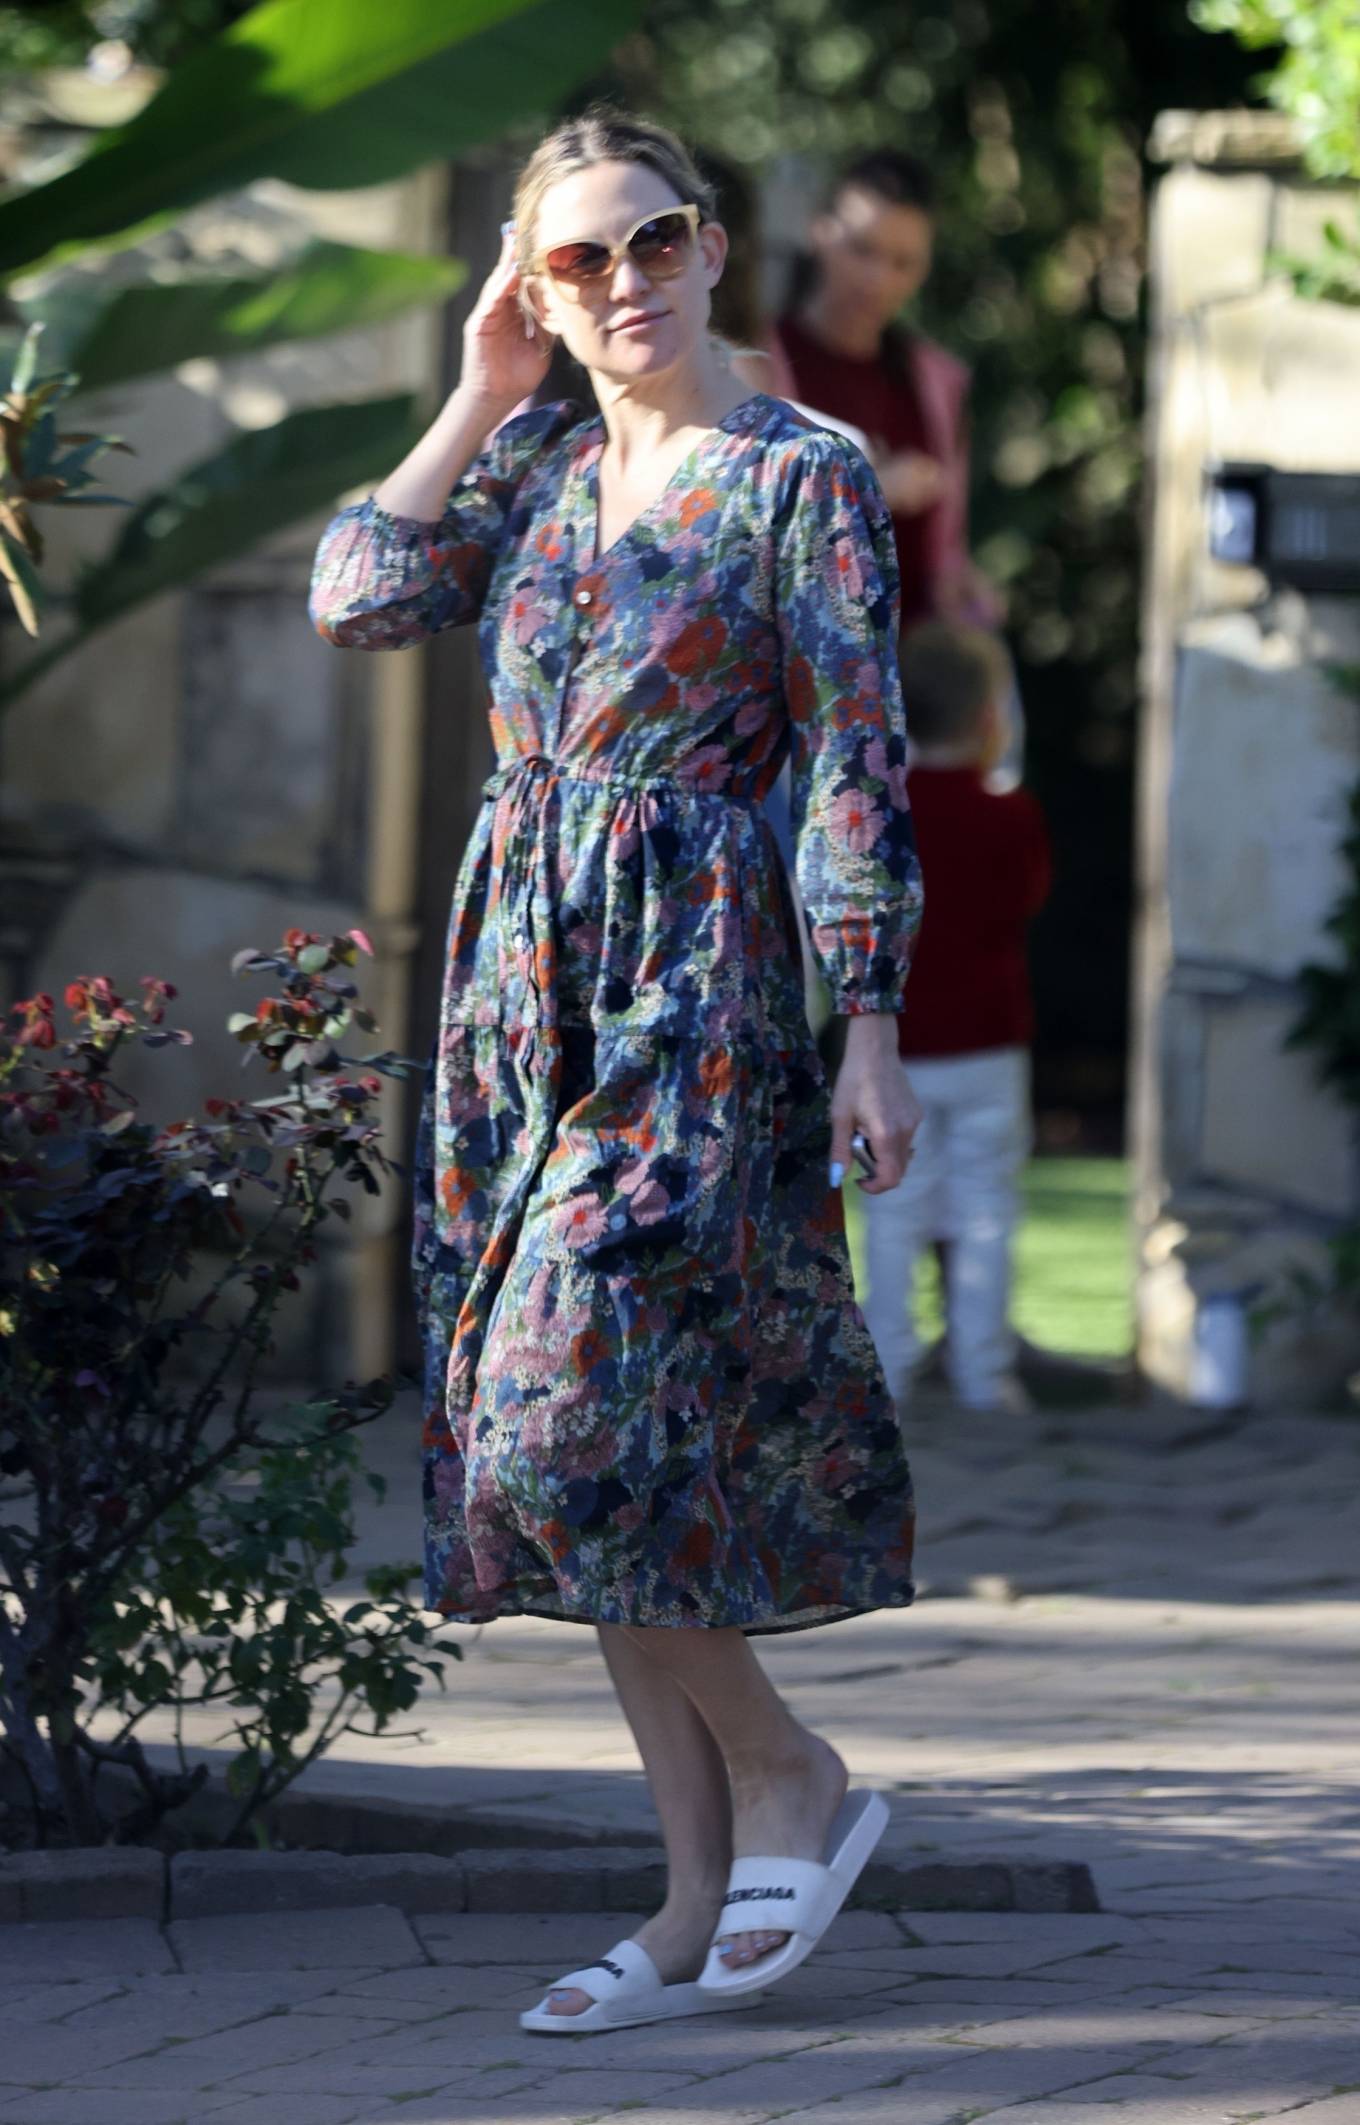 Kate Hudson 2022 : Kate Hudson – Wears a flower dress while out in Los Angeles-03